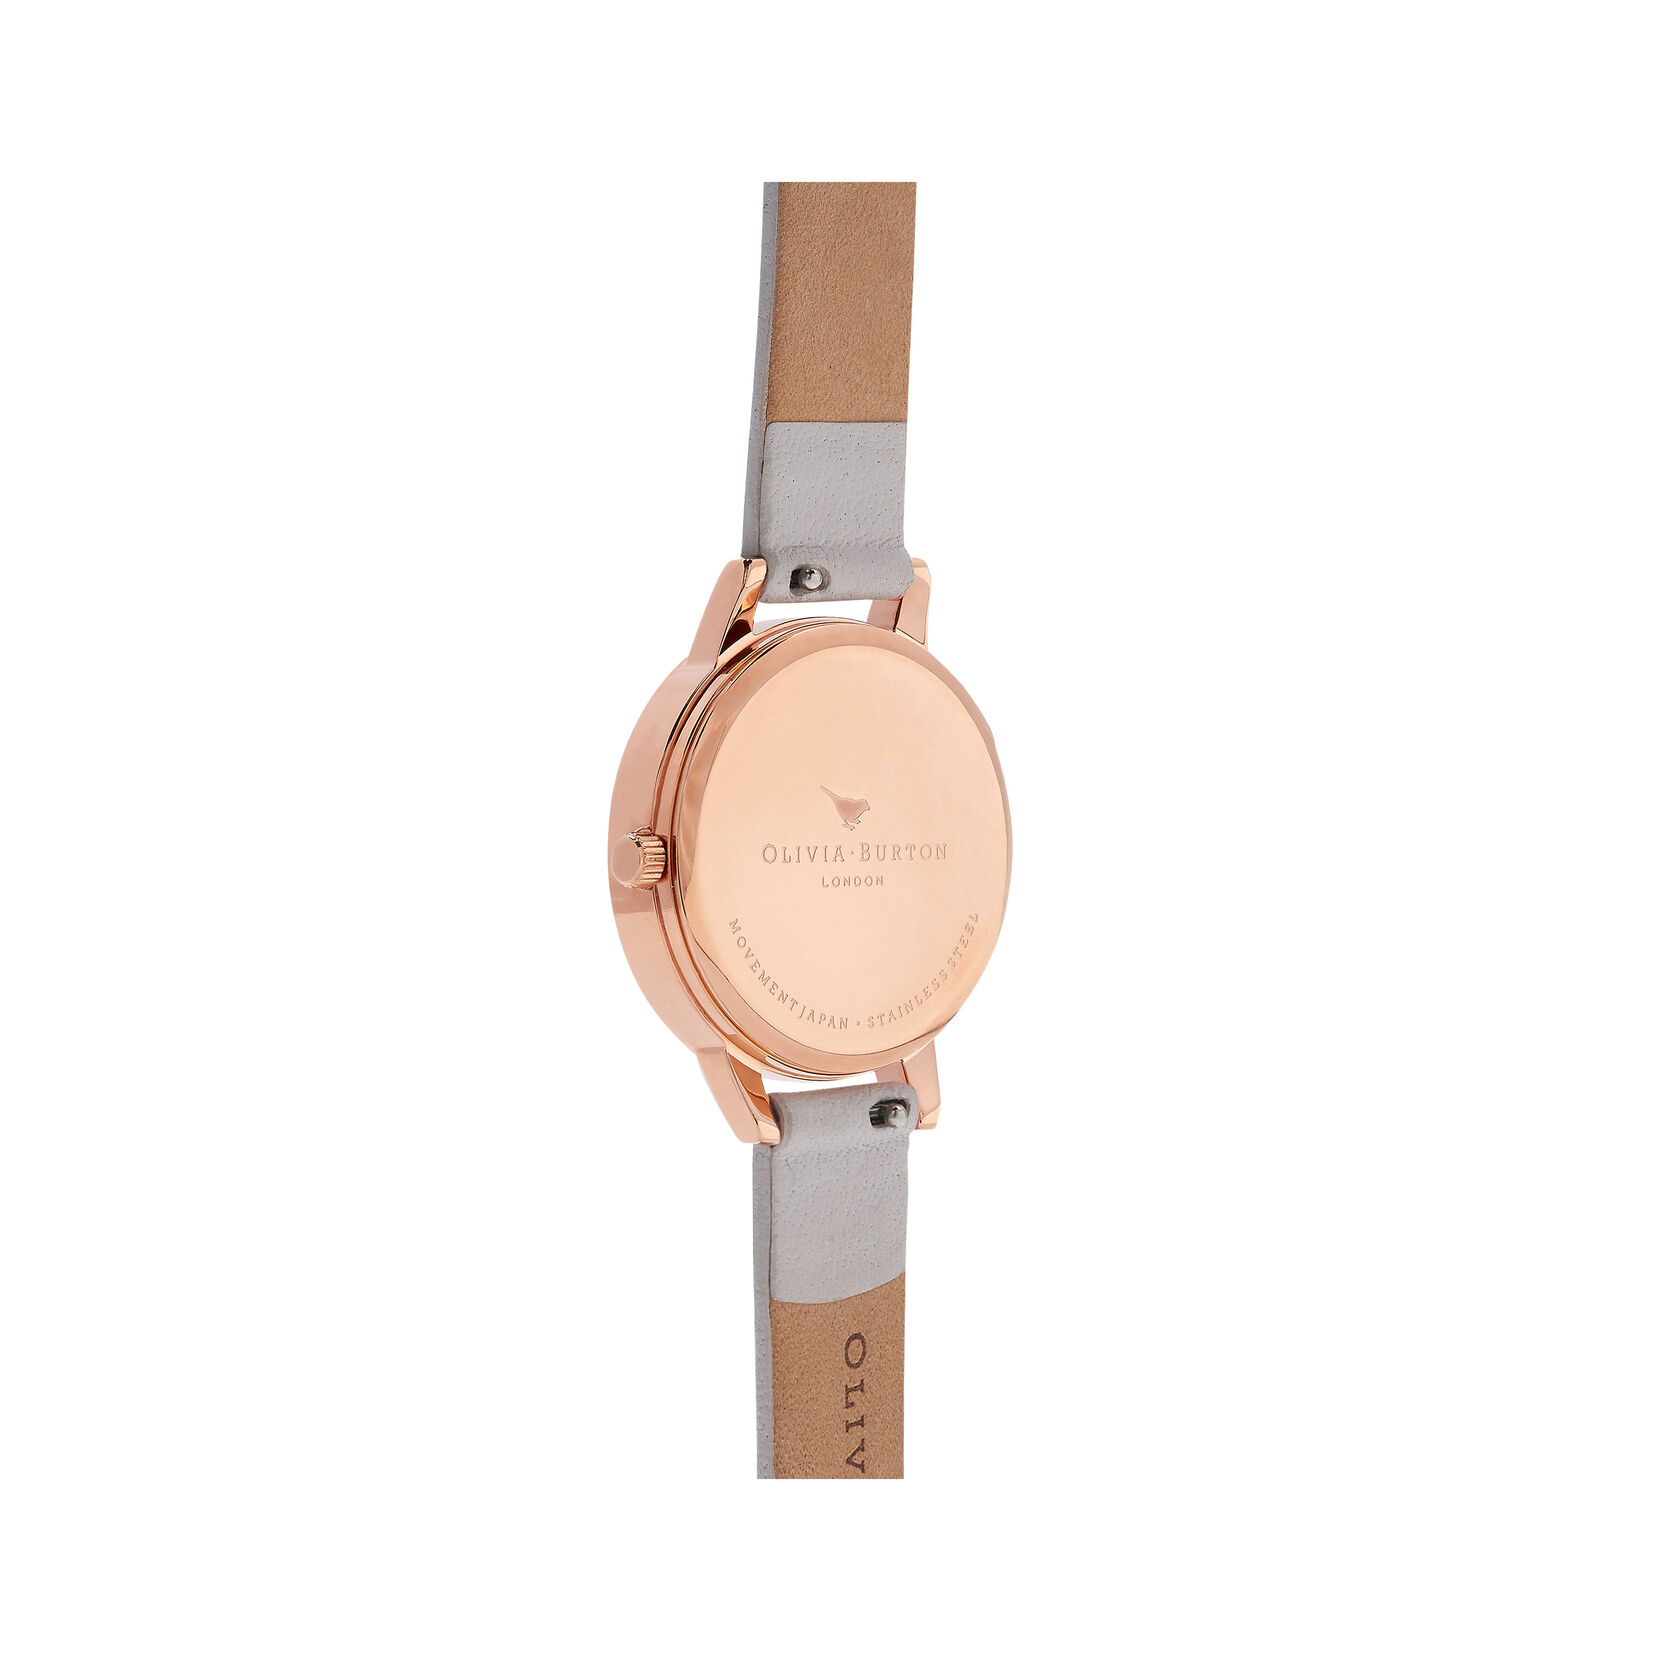 Abstract Florals Blush & Rose Gold Watch